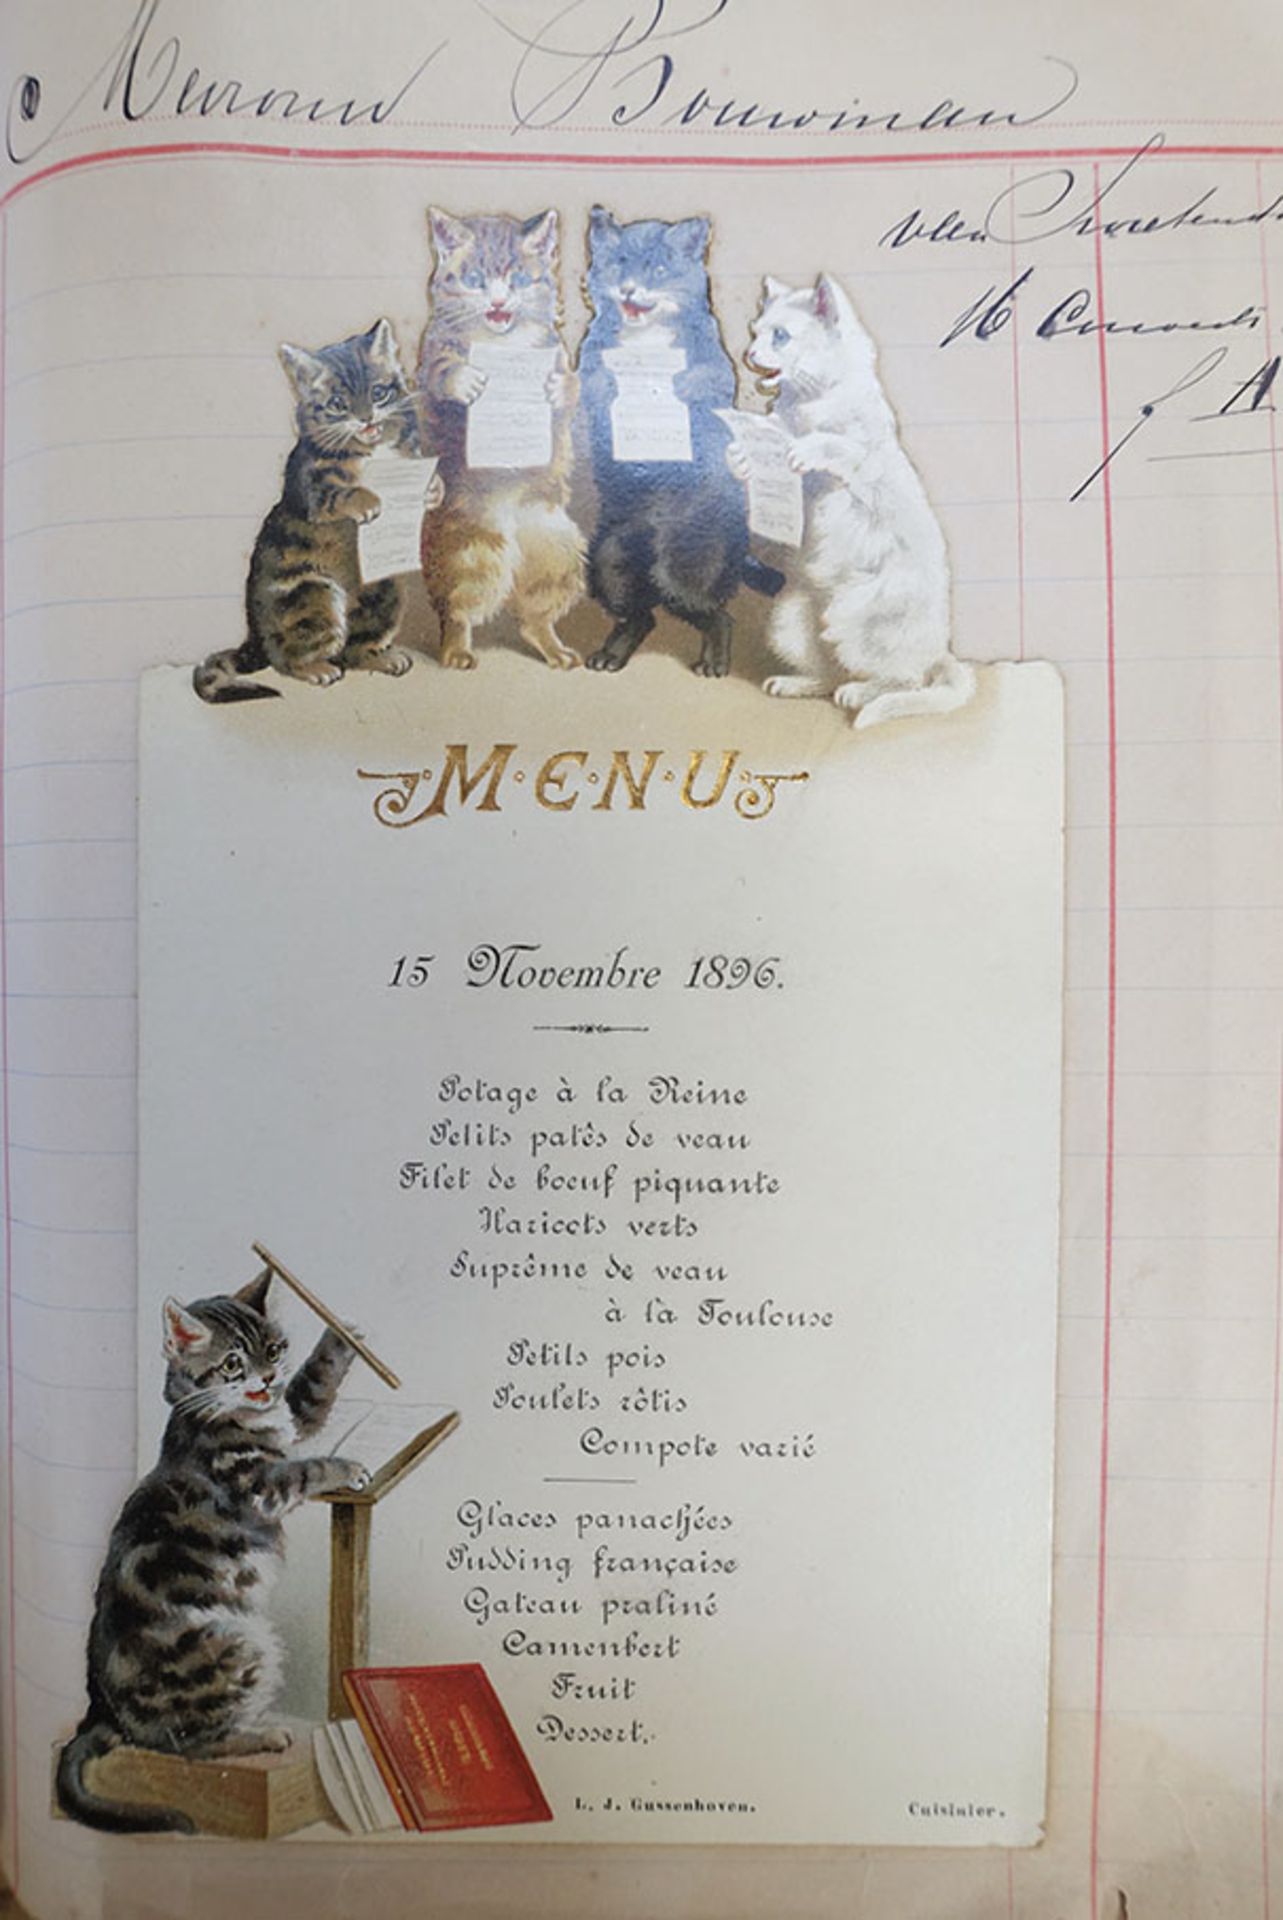 MENU CARDS -- COLLECTION OF ± 125 MENU CARDS from the period 1884-1901 'composed' by Lambertus - Image 3 of 4